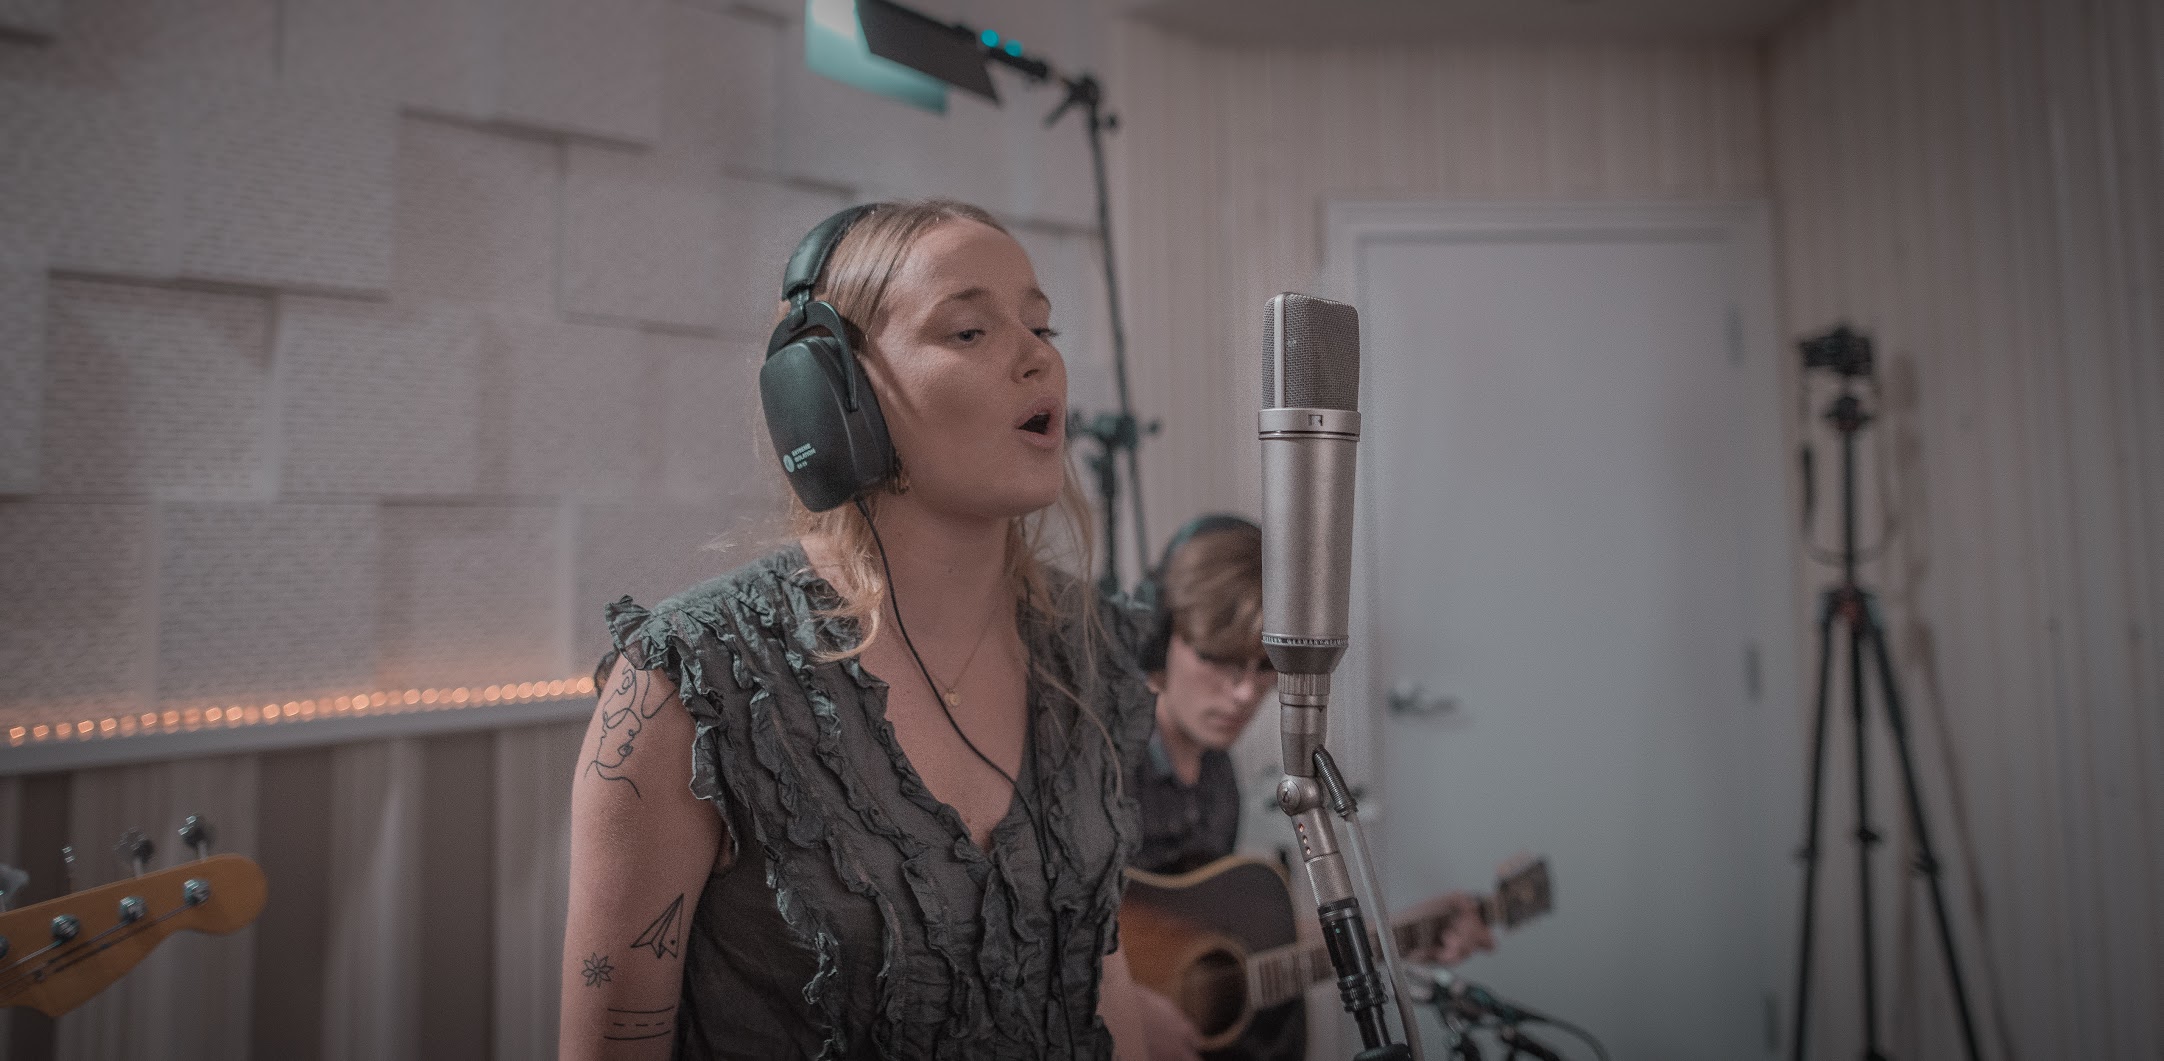 Watch Leah Blevins Perform “Walk Home” at Trace Horse Studio